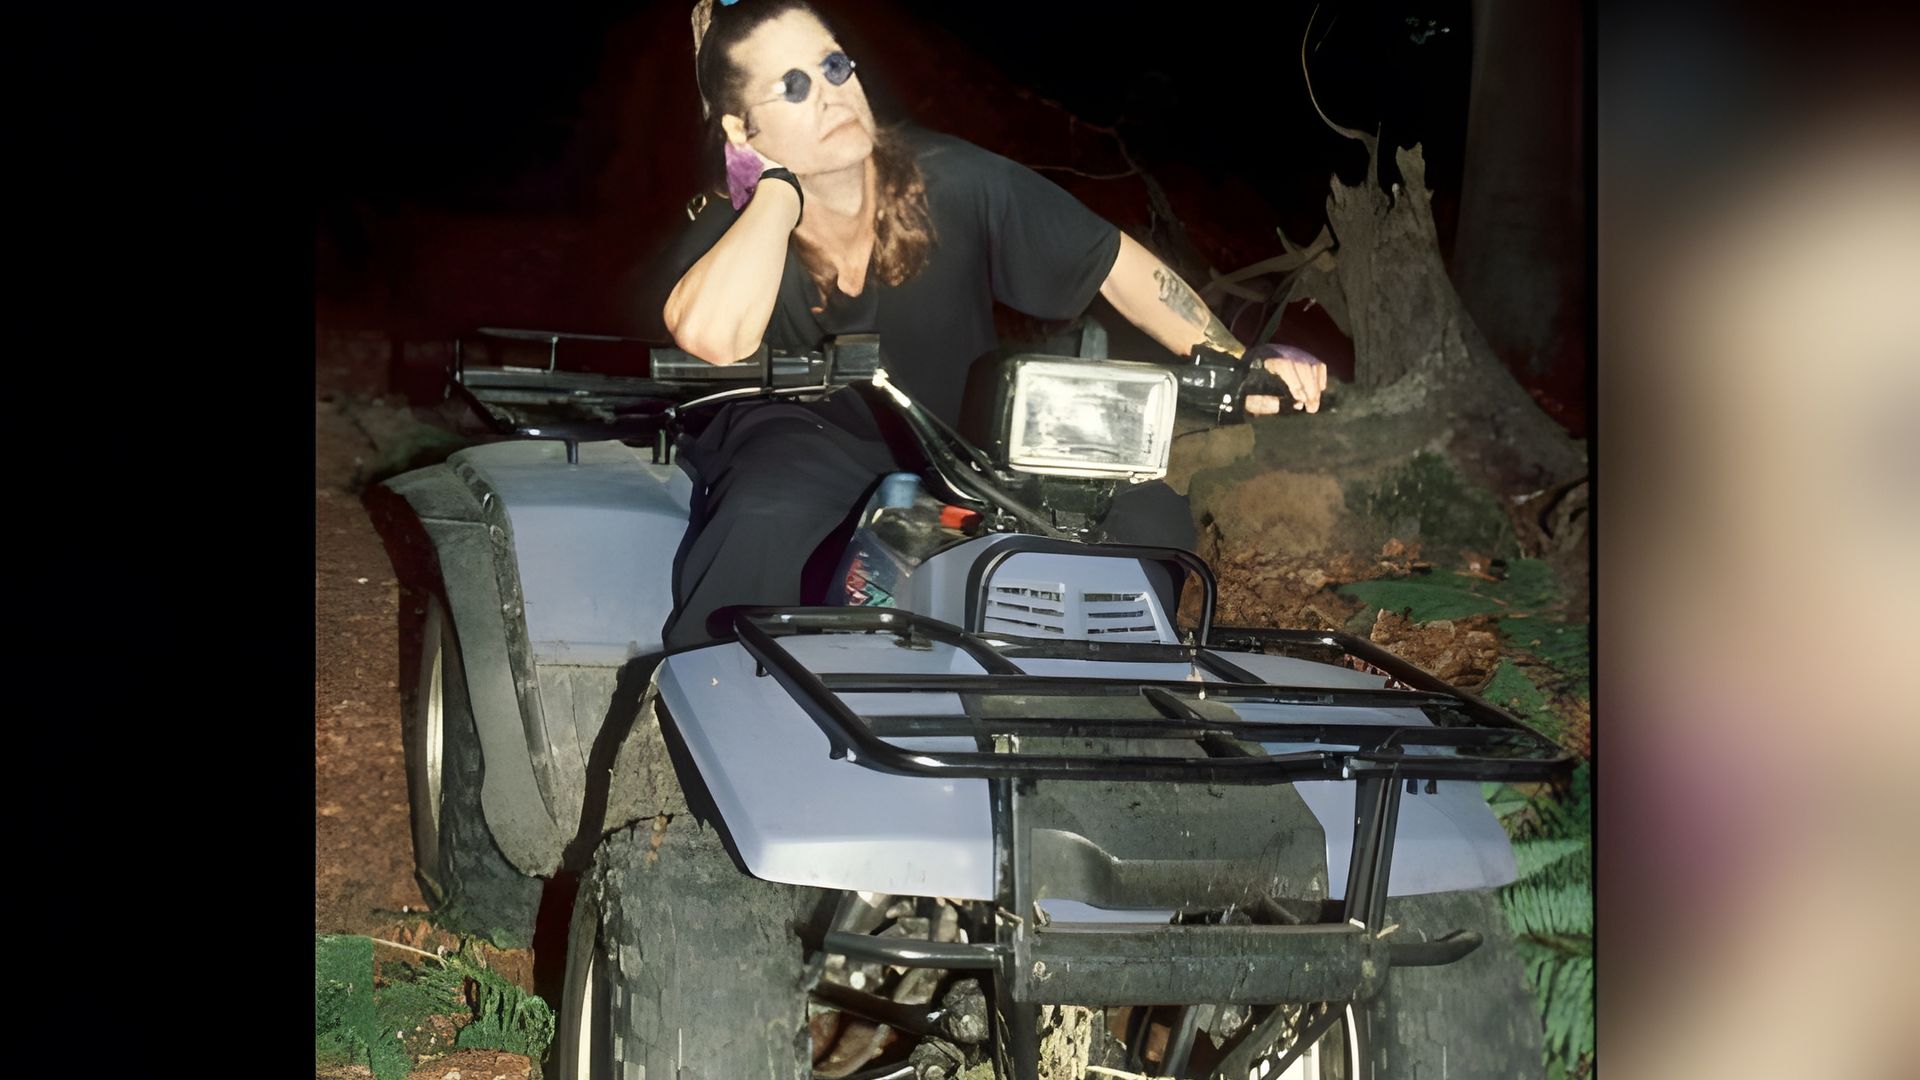 Ozzy Osbourne and the ill-fated ATV